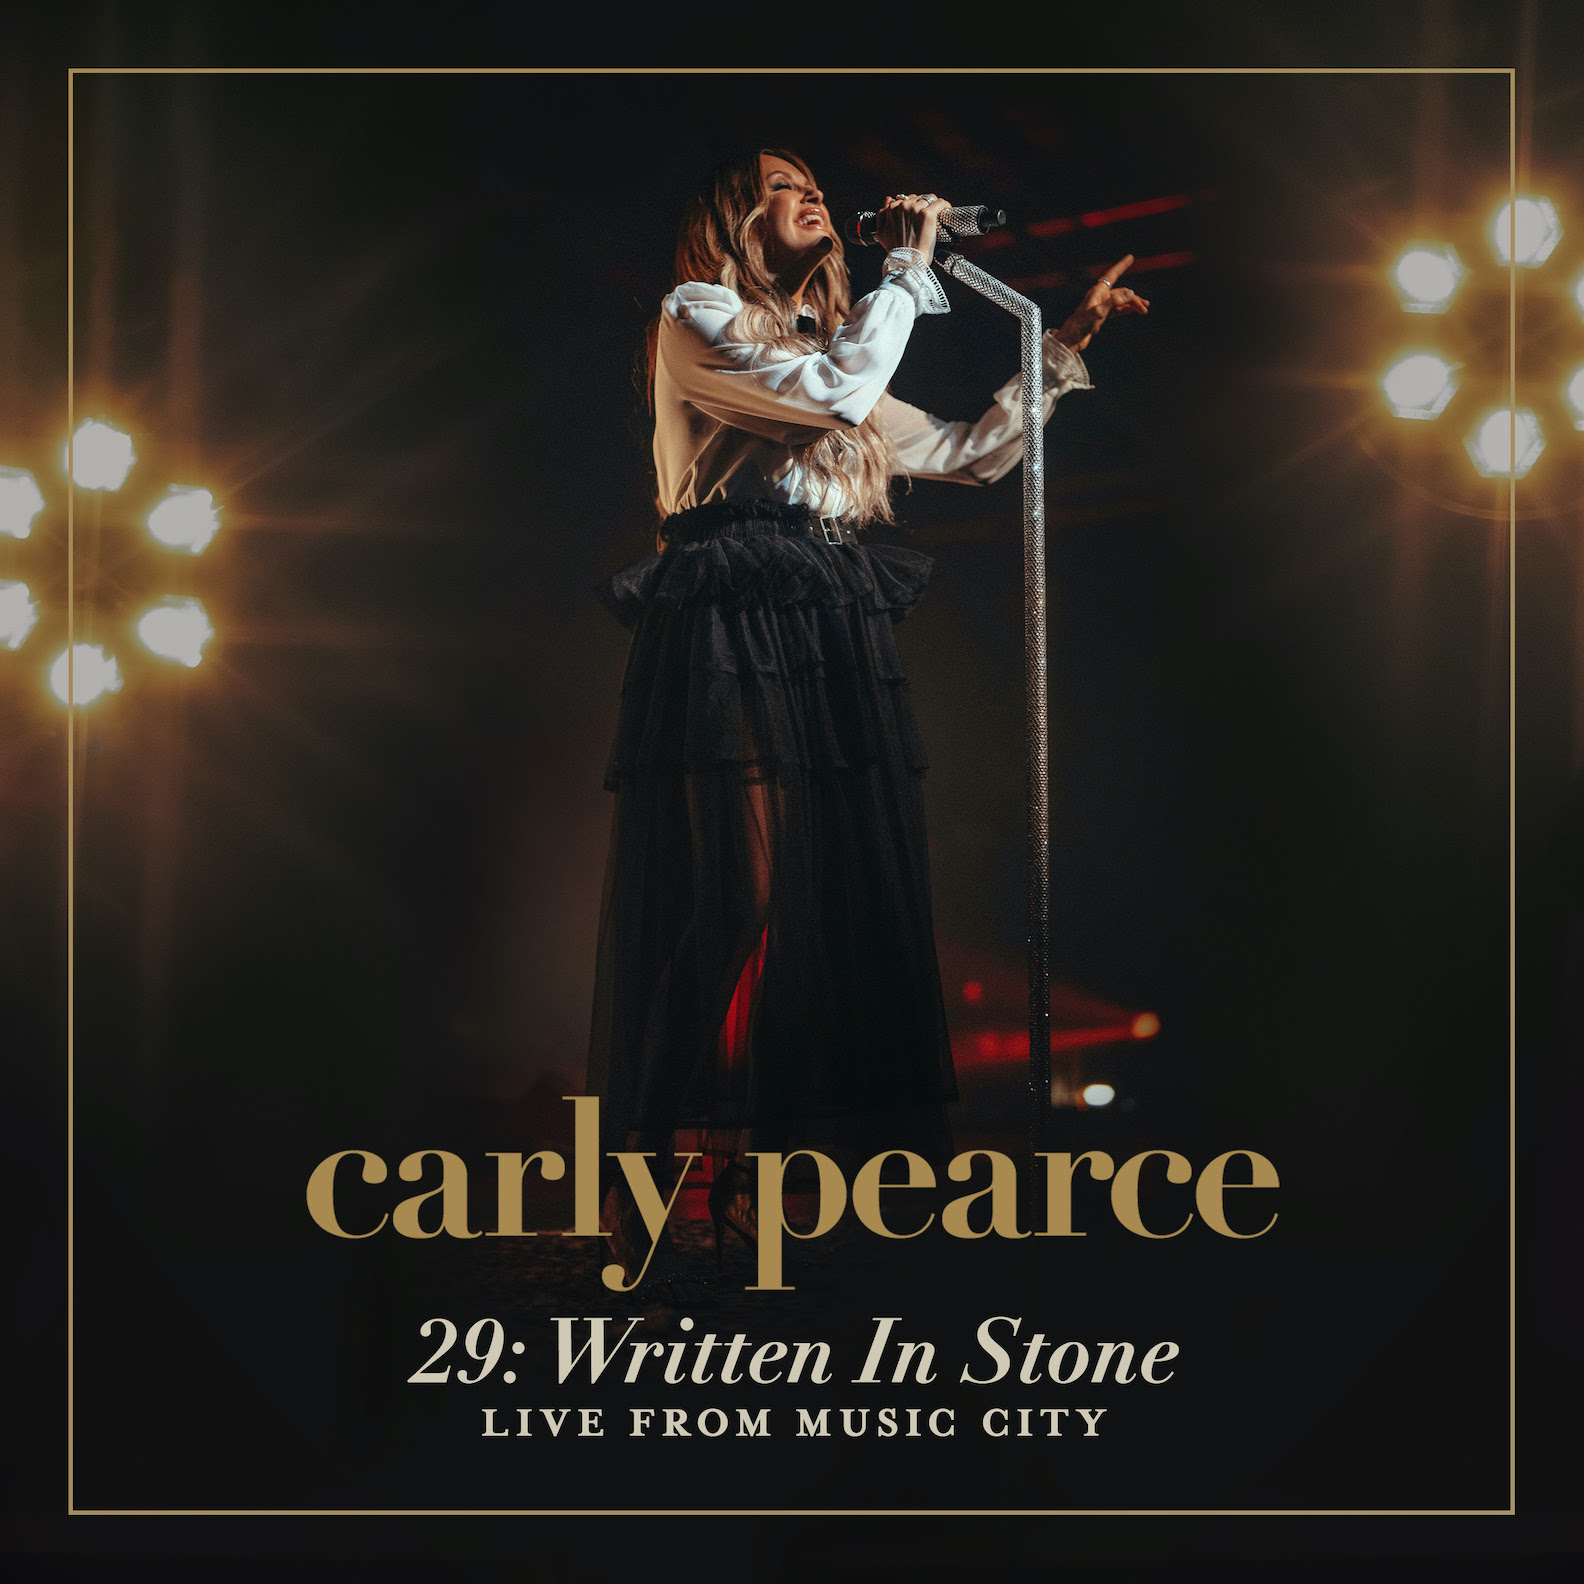 Carly Pearce, `Written in Stone (Live From Music City)` album cover courtesy of Big Machine Records